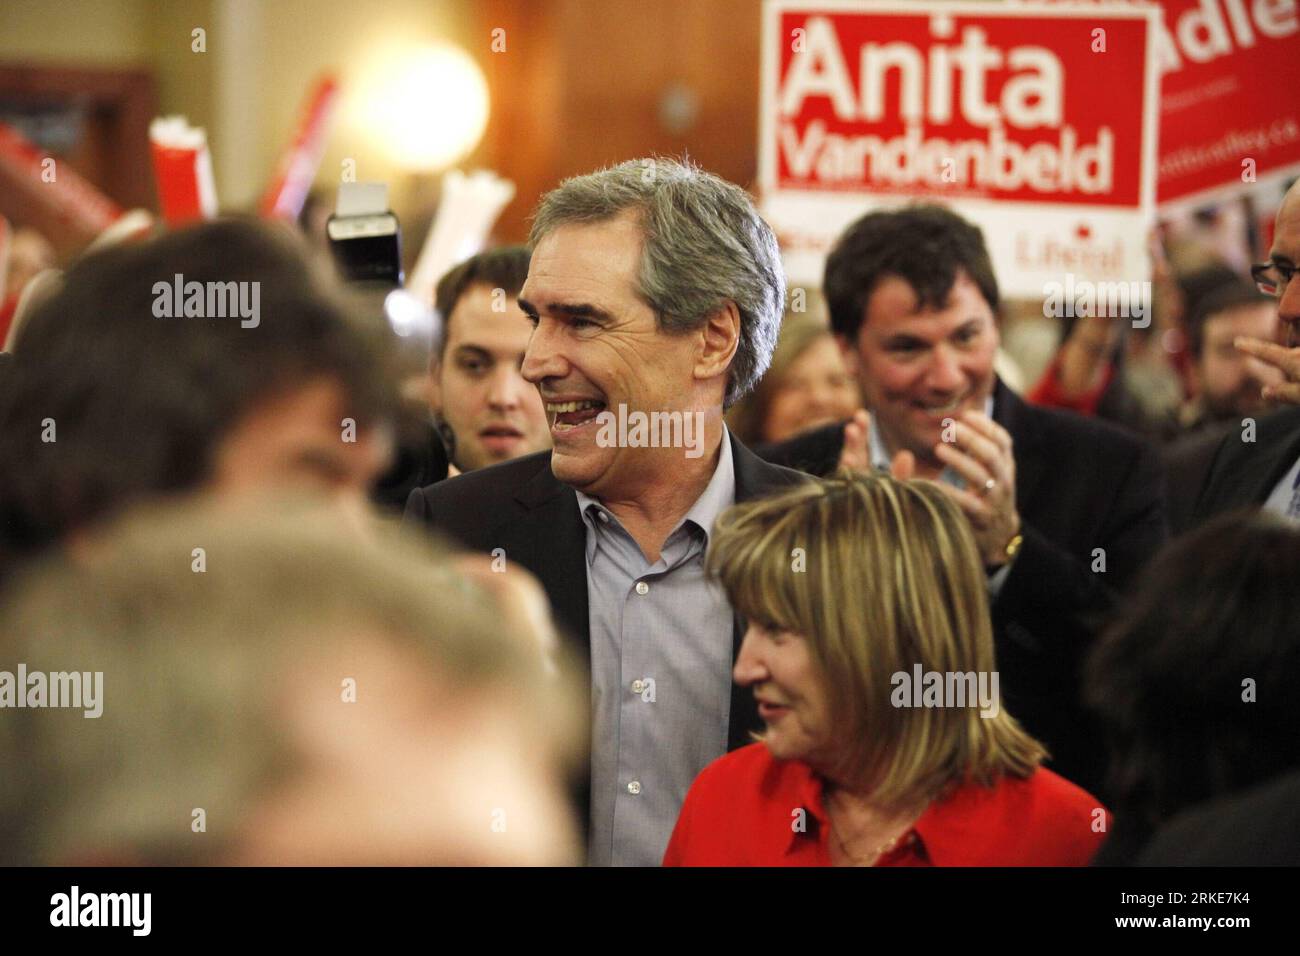 Bildnummer: 55091989  Datum: 26.03.2011  Copyright: imago/Xinhua (110327) -- OTTAWA, March 27, 2011 (Xinhua) -- Canada s Liberal Party leader Michael Ignatieff launches his campaign in Ottawa, Canada, March 26, 2011. Canada s political party leaders kicked off their campaigns for the 41st general election Saturday after the Canadian House of Commons passed a non-confidence motion defeating the Conservative government led by Prime Minister Stephen Harper for contempt of Parliament. (Xinhua/David Kawai) (lyx) CANADA-GENERAL ELECTION-PARTY LEADERS-CAMPAIGN PUBLICATIONxNOTxINxCHN People Politik Wa Stock Photo